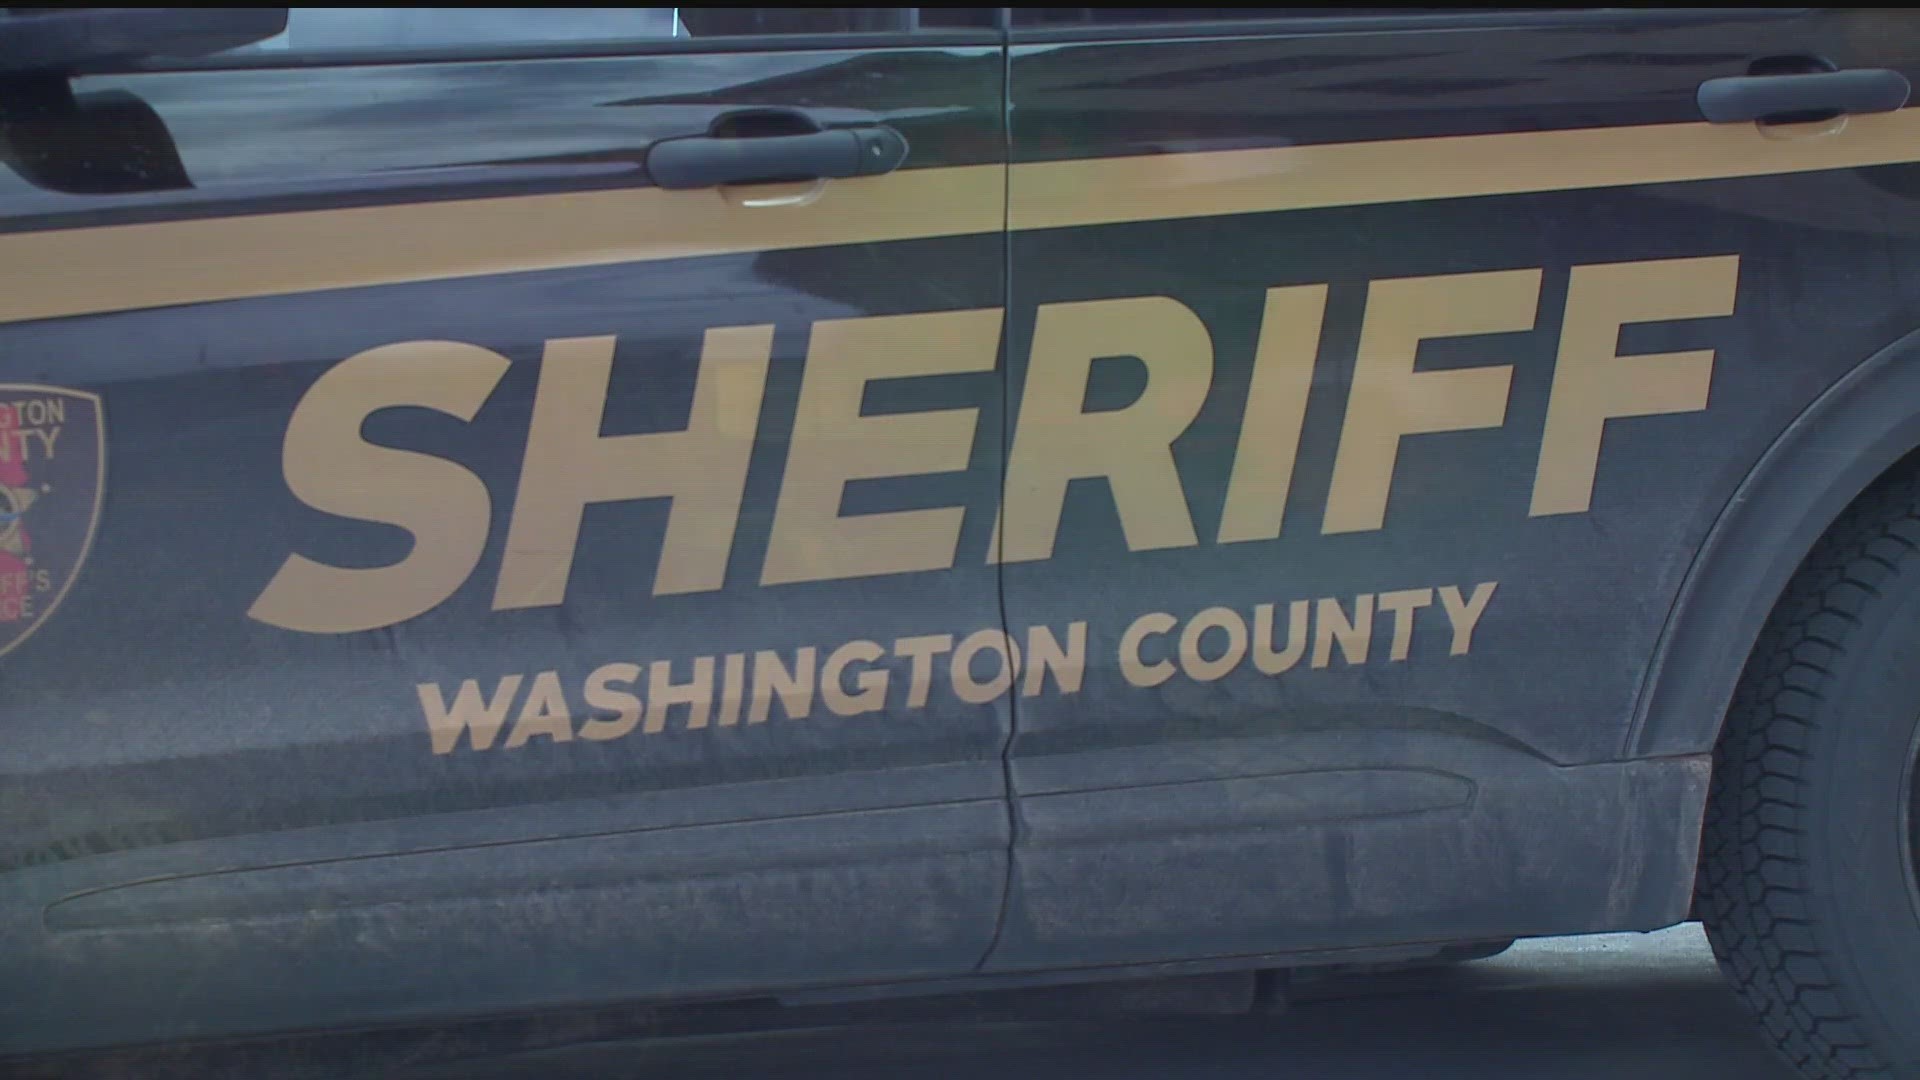 Deputies responded Monday to a welfare check at a Lakeland residence after the homeowners failed to answer the door for a scheduled appointment.